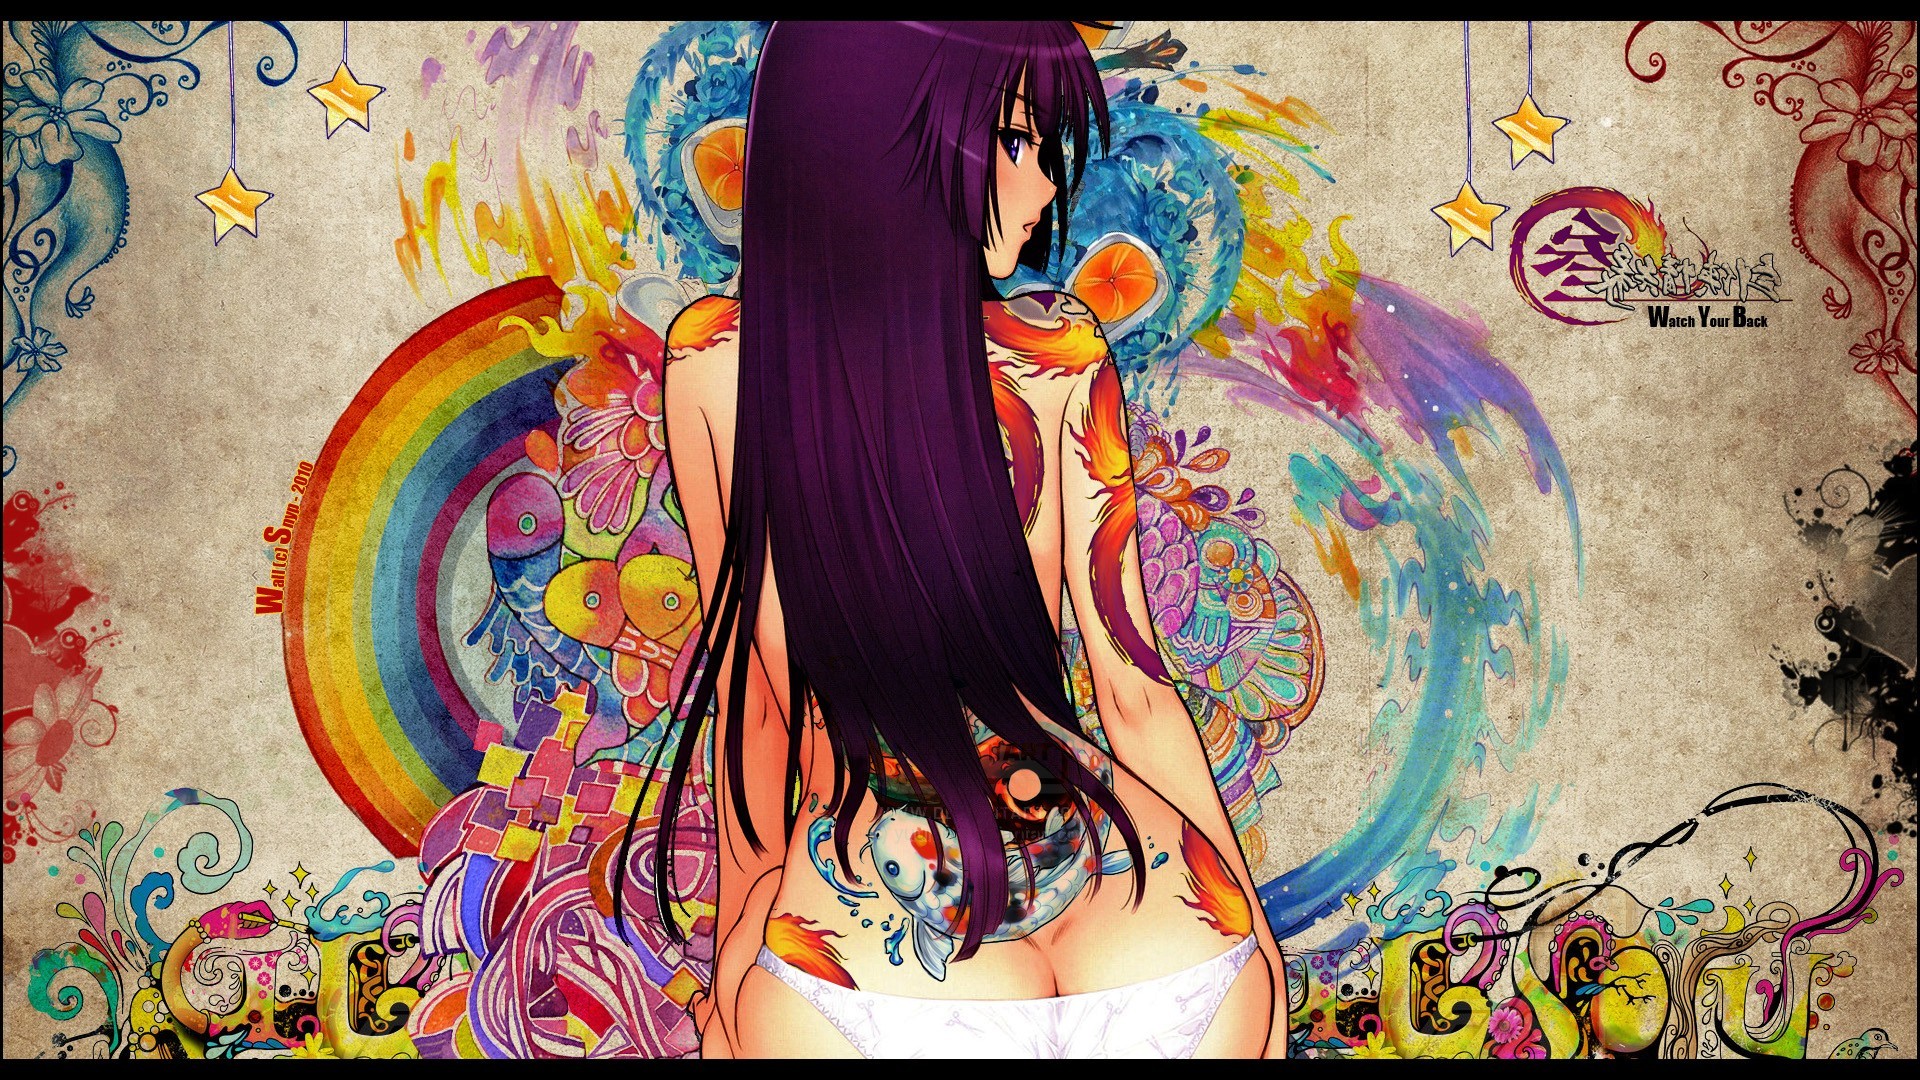 1920x1080 [NSFW]Wallpaper Gallery by Snyp - Part I - MMORPG News - MMOsite.com